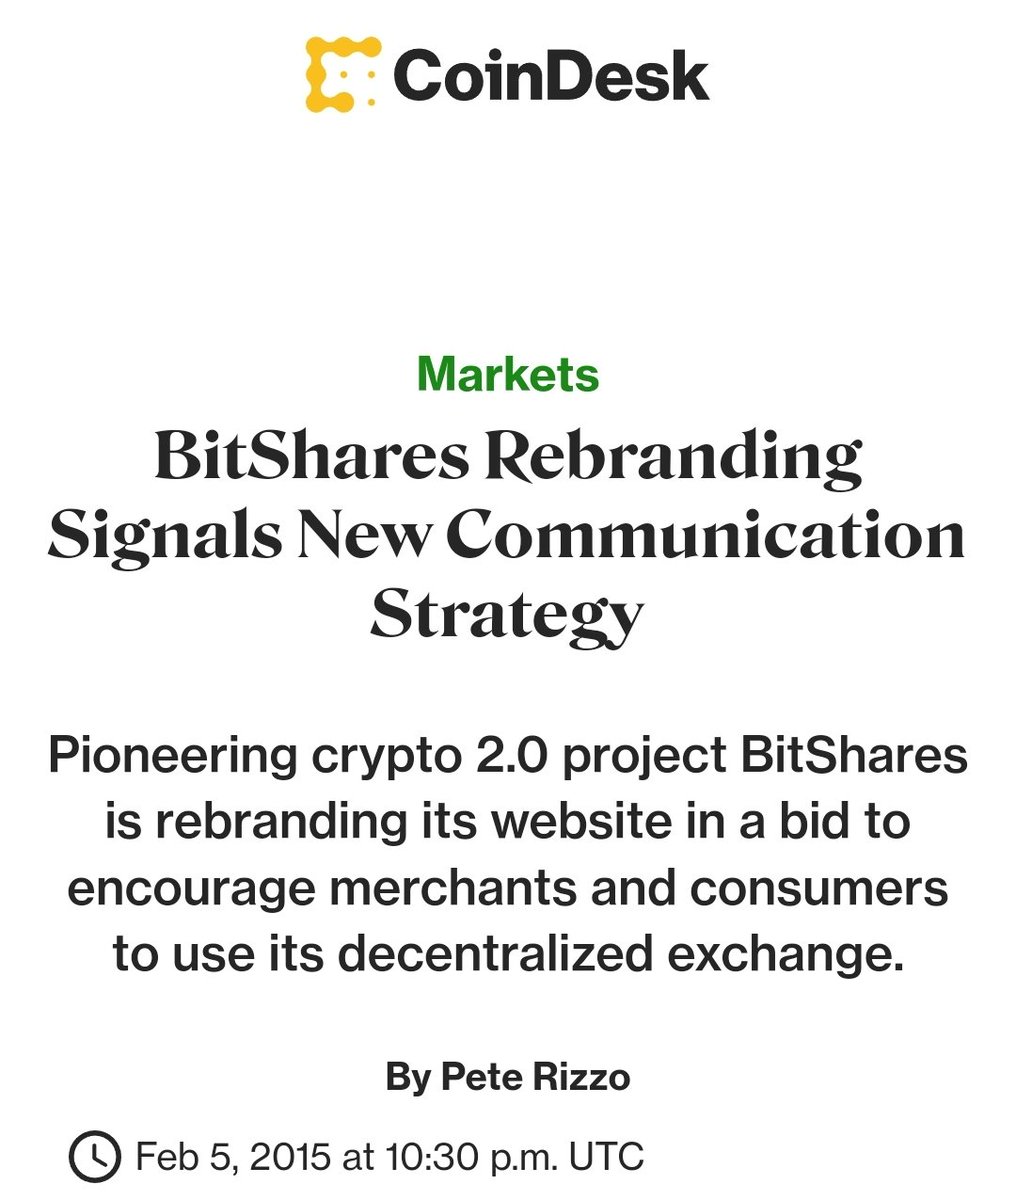 Remember Bitshares? It was *the* altcoin. Decentralized exchanges, token issuance, algorithmic stablecoin, delegated proof-of-stake, the whole package. This is the fate of your altcoin. A cringe memory, at best you'll feel sporadically grateful for dumping it for BTC in time.